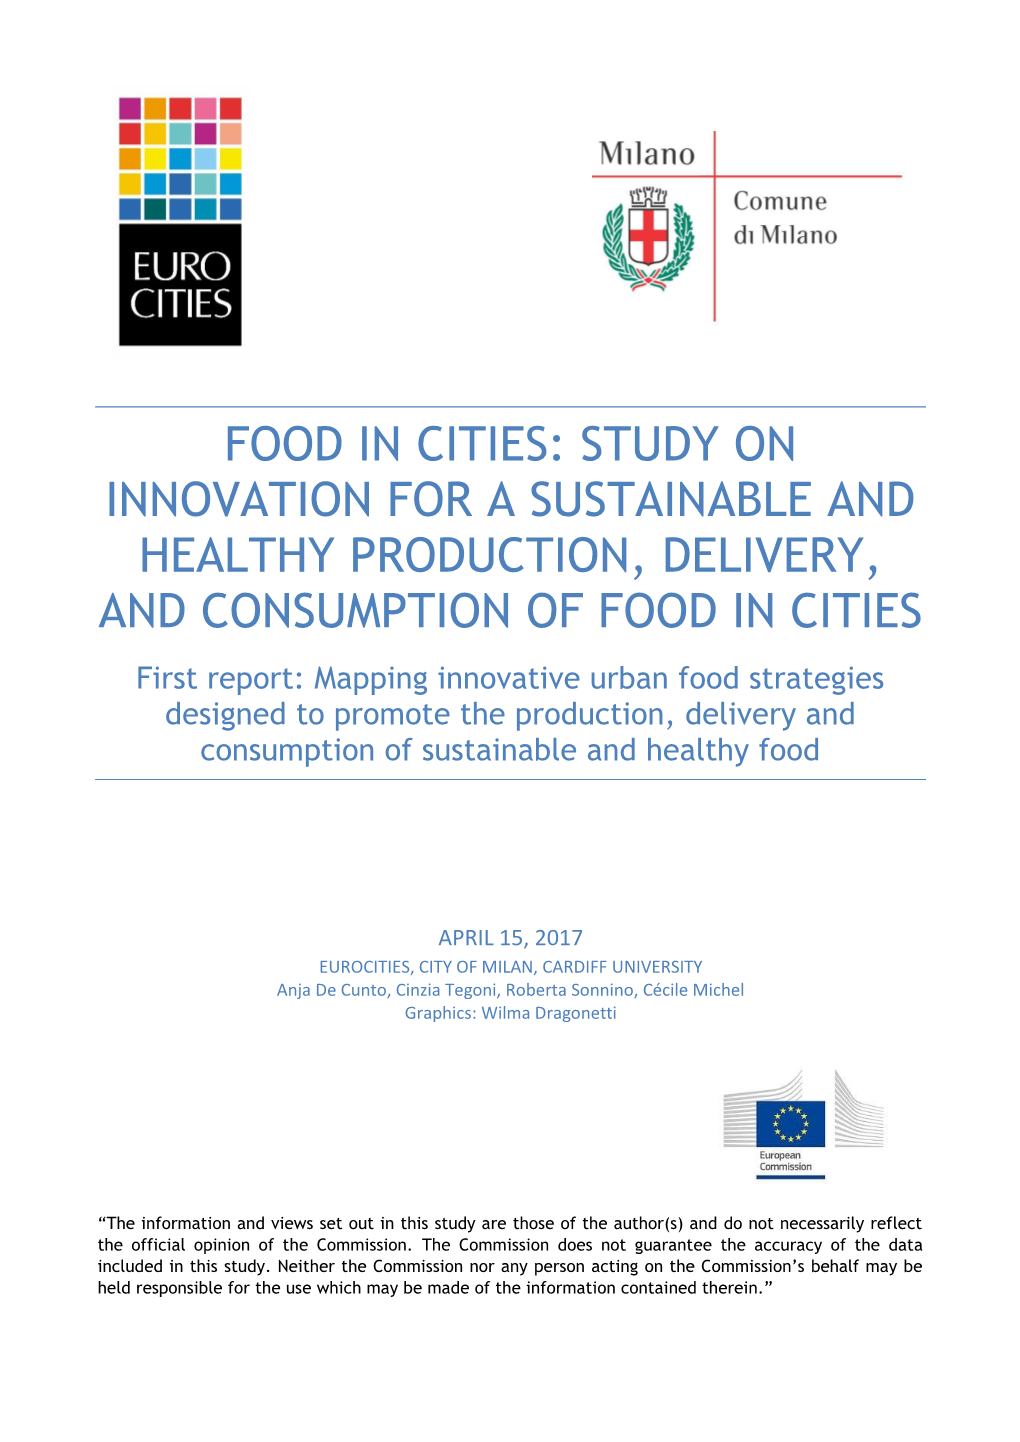 Food in Cities: Study on Innovation for a Sustainable and Healthy